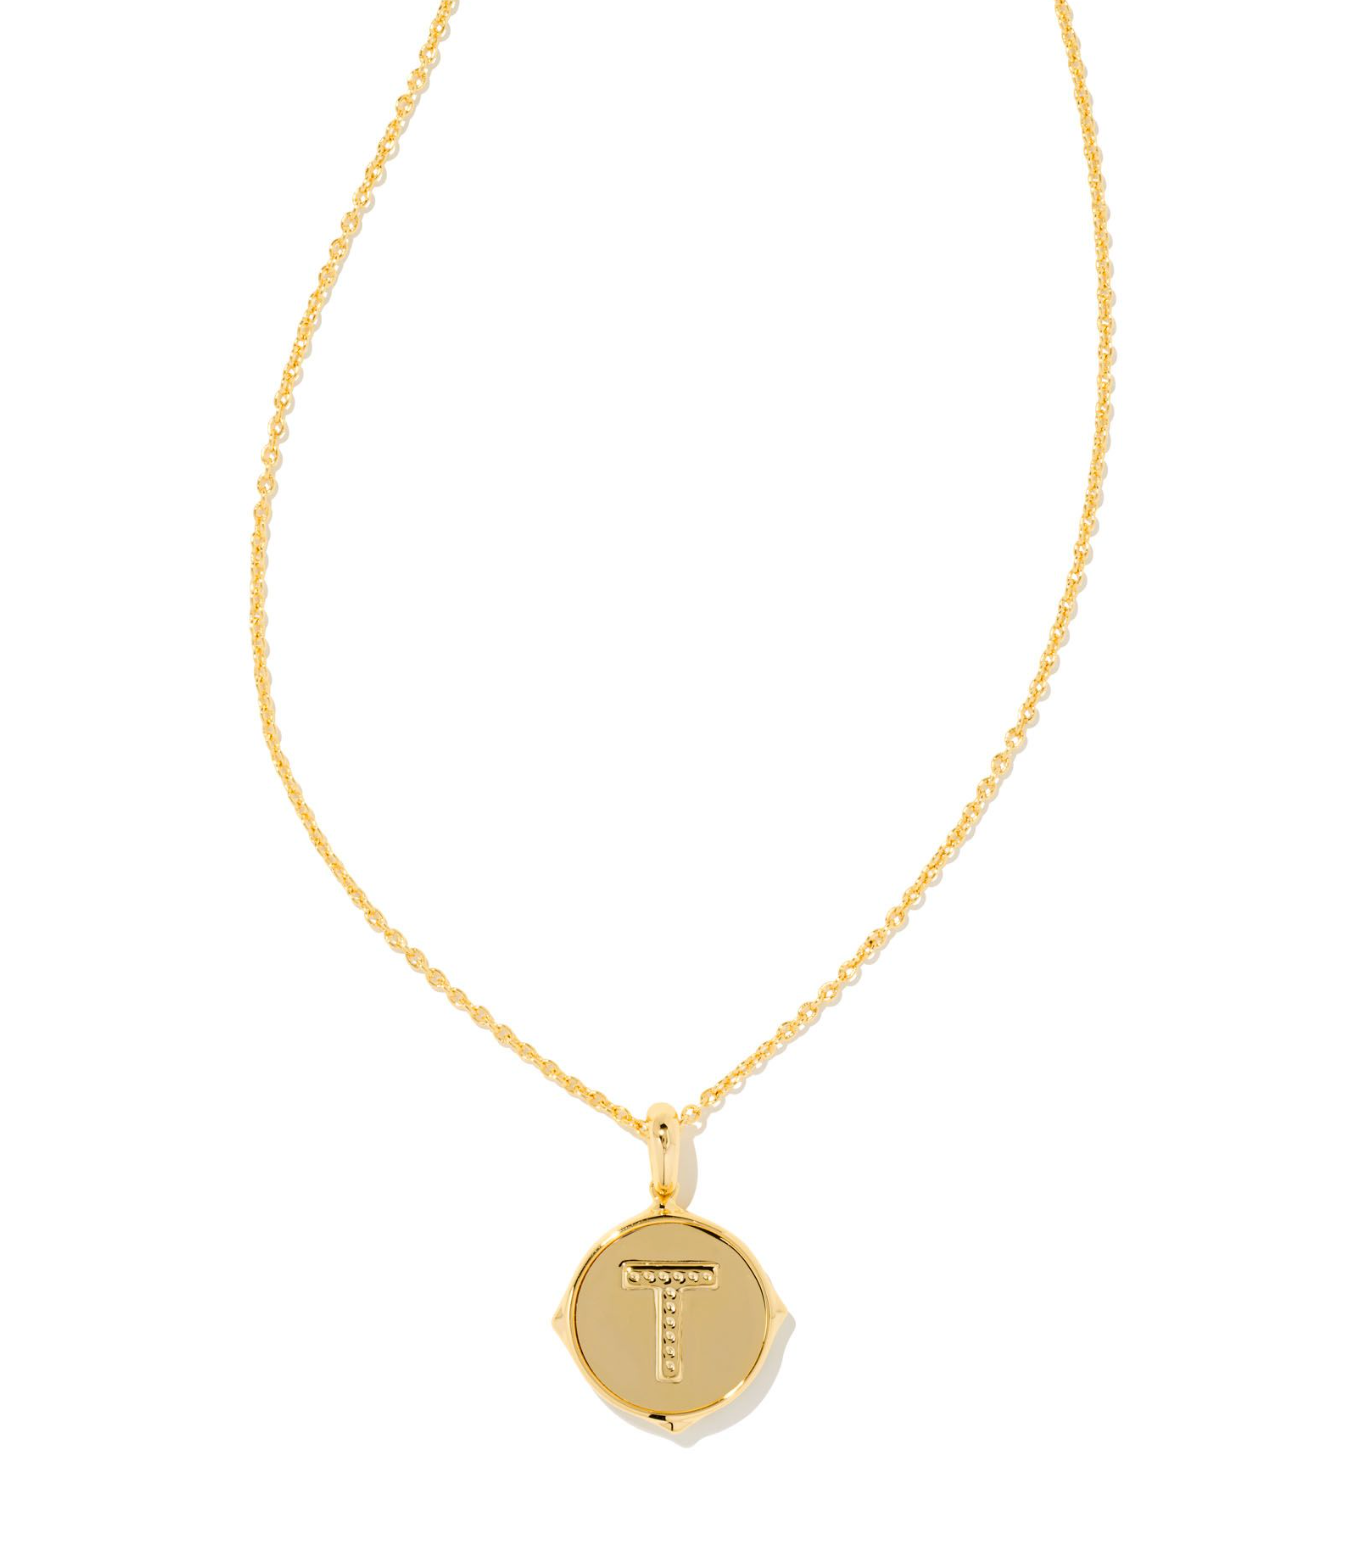 Kendra Scott Elisa Gold Pendant Necklace in Navy Abalone – Sugar & Spice